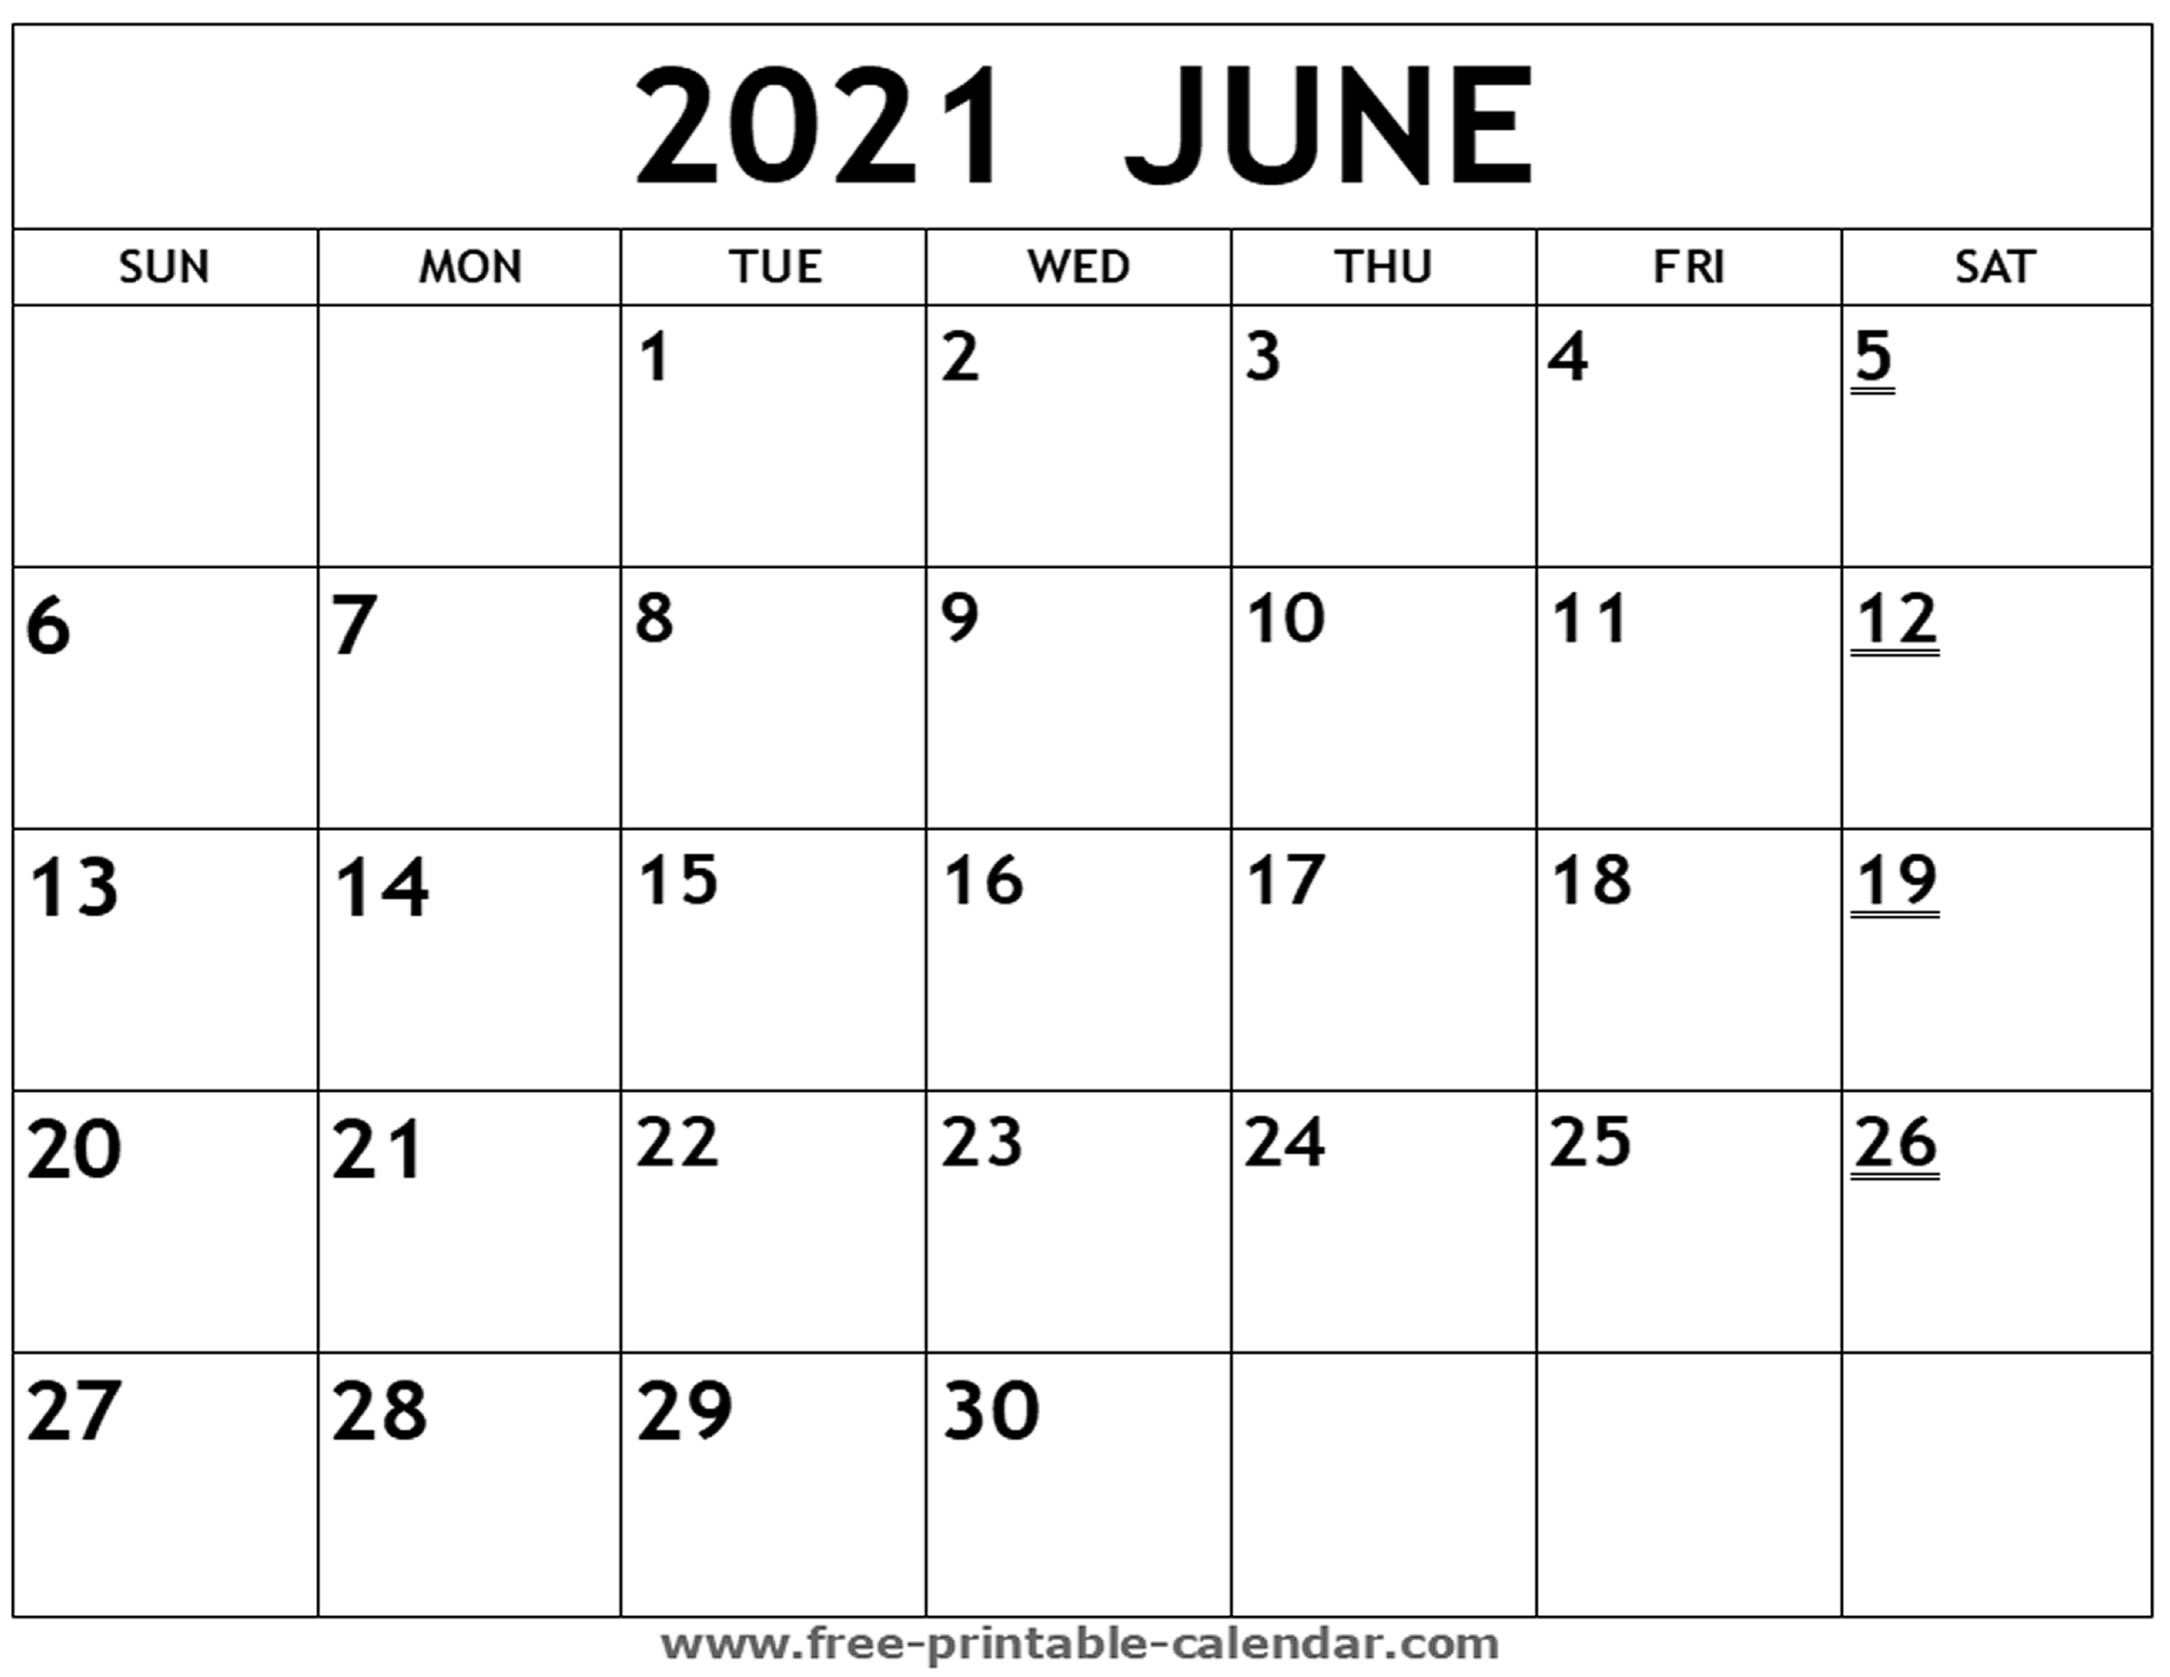 Pick Free Print 2021 Calendars Without Downloading